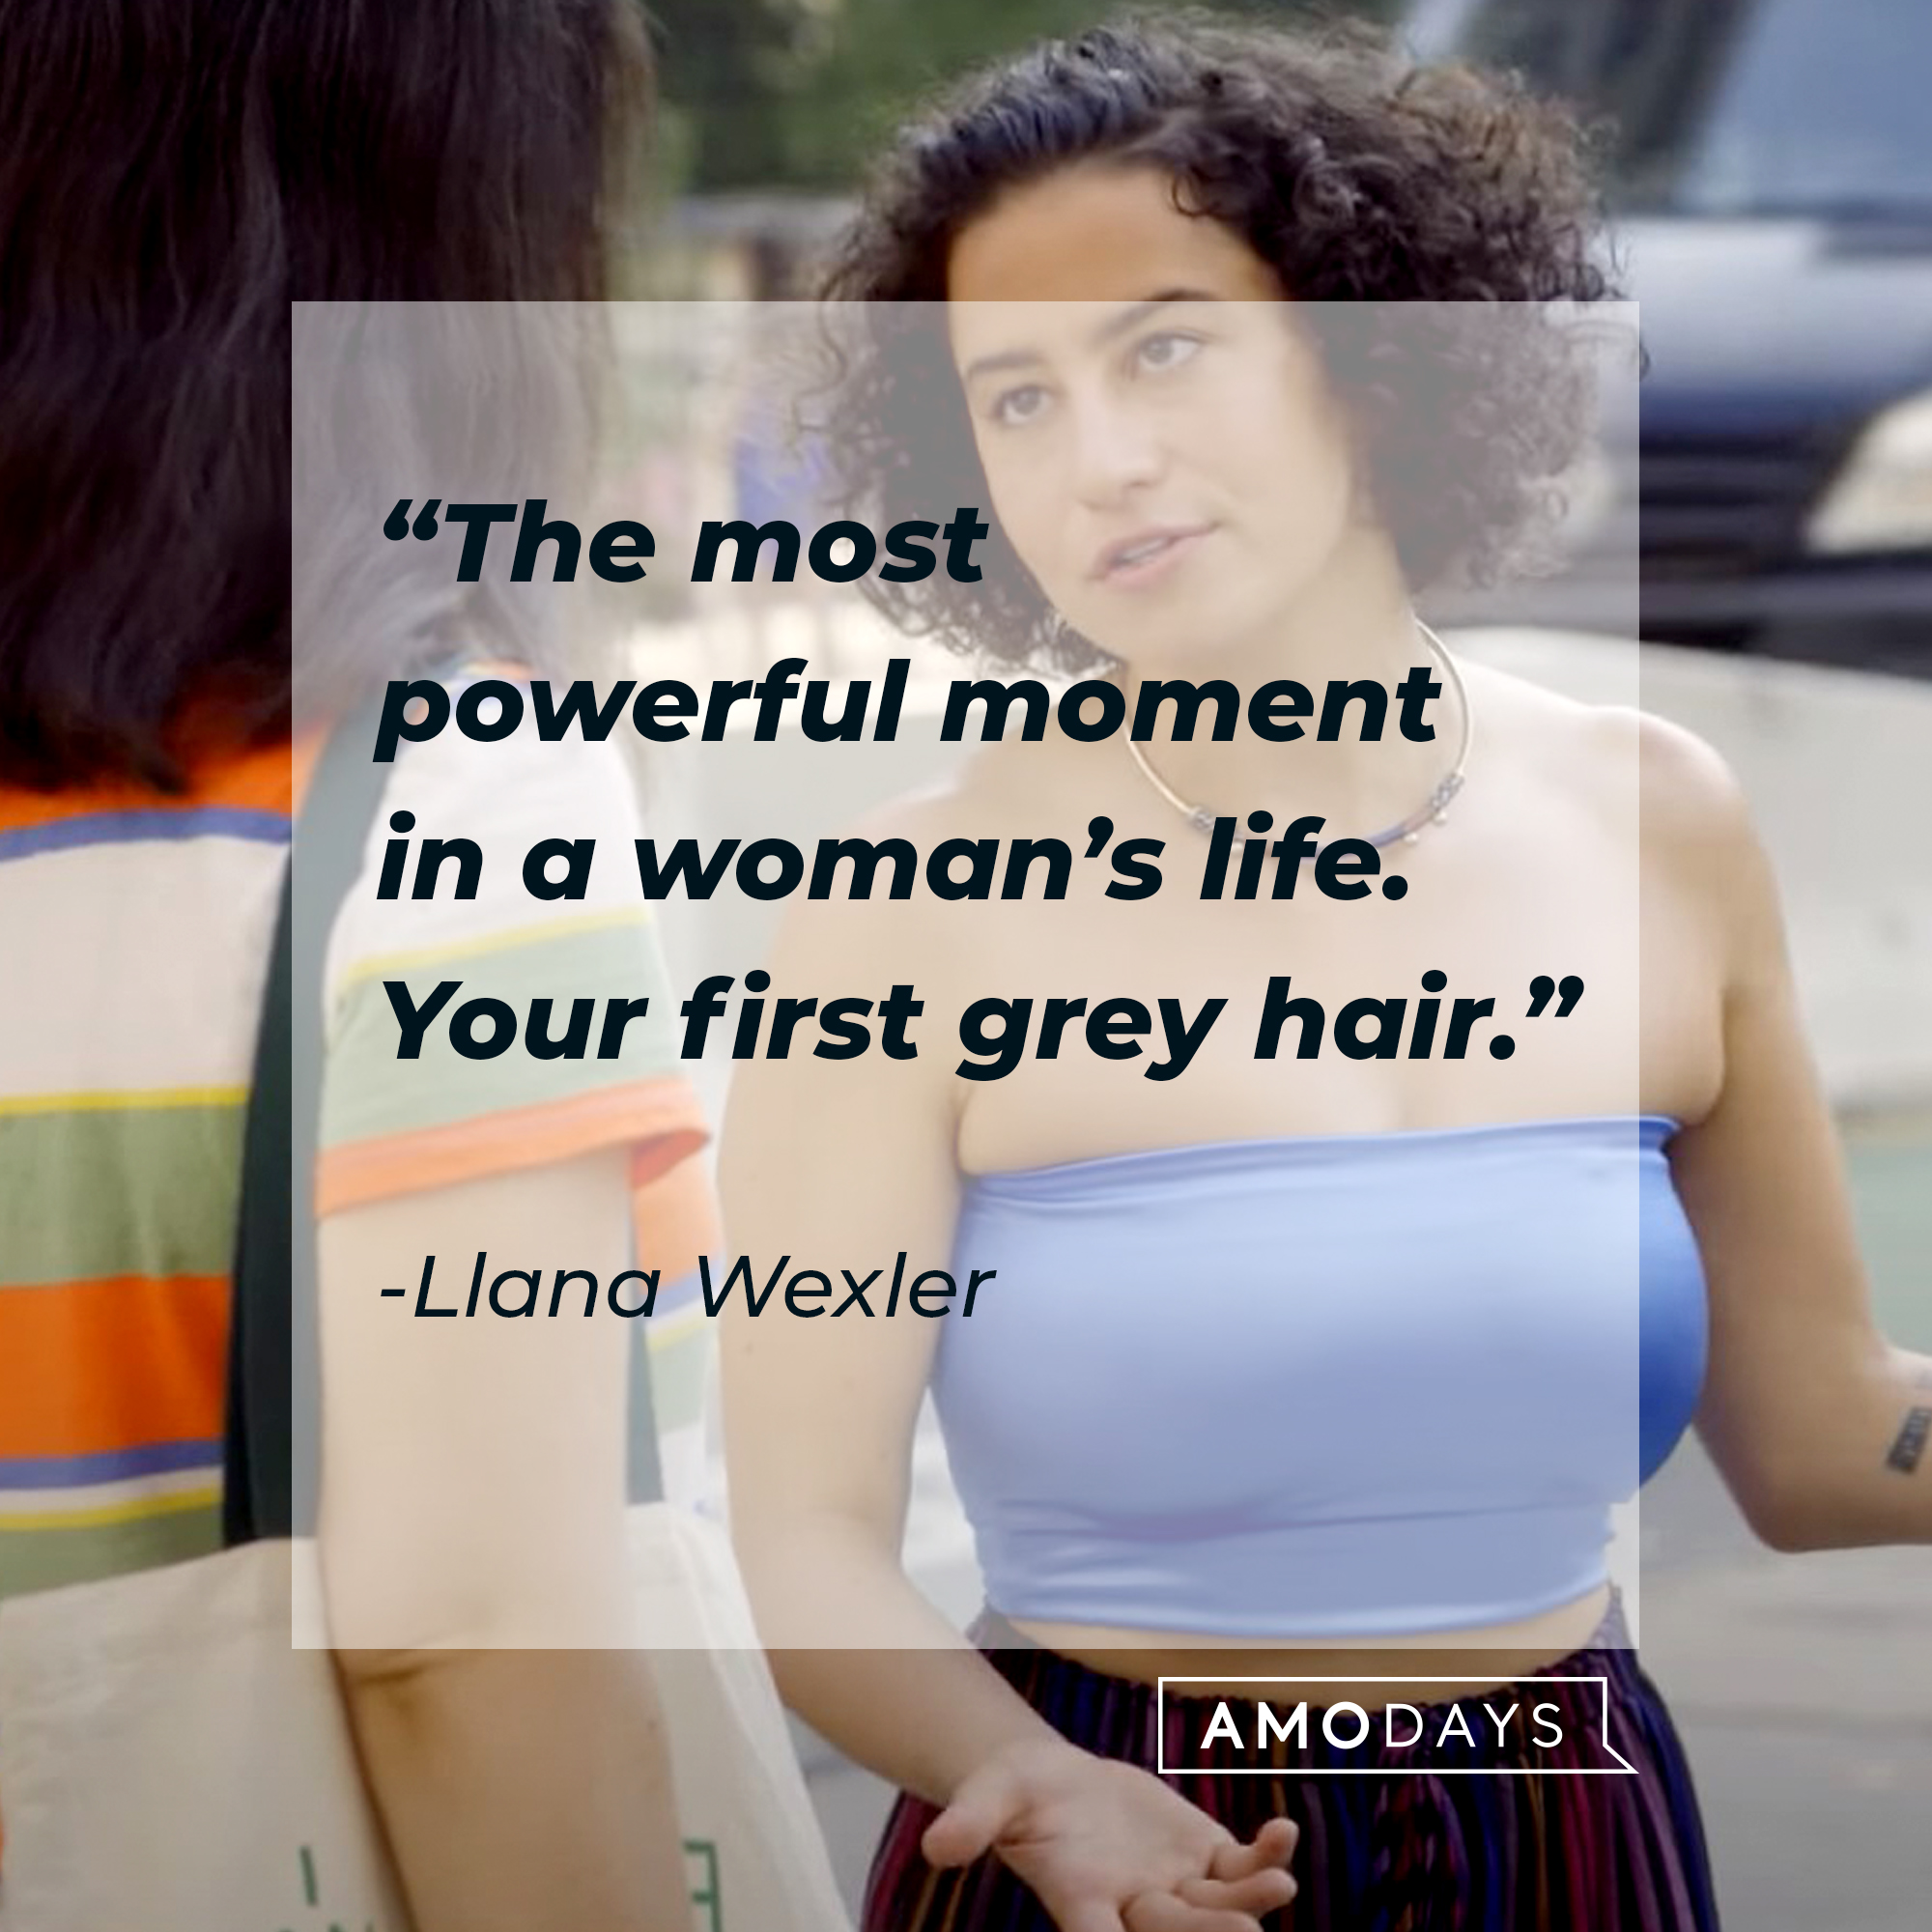 An image of Llana Wexler with her quote: “The most powerful moment in a woman’s life. Your first grey hair.” | Source: youtube.com/ComedyCentral